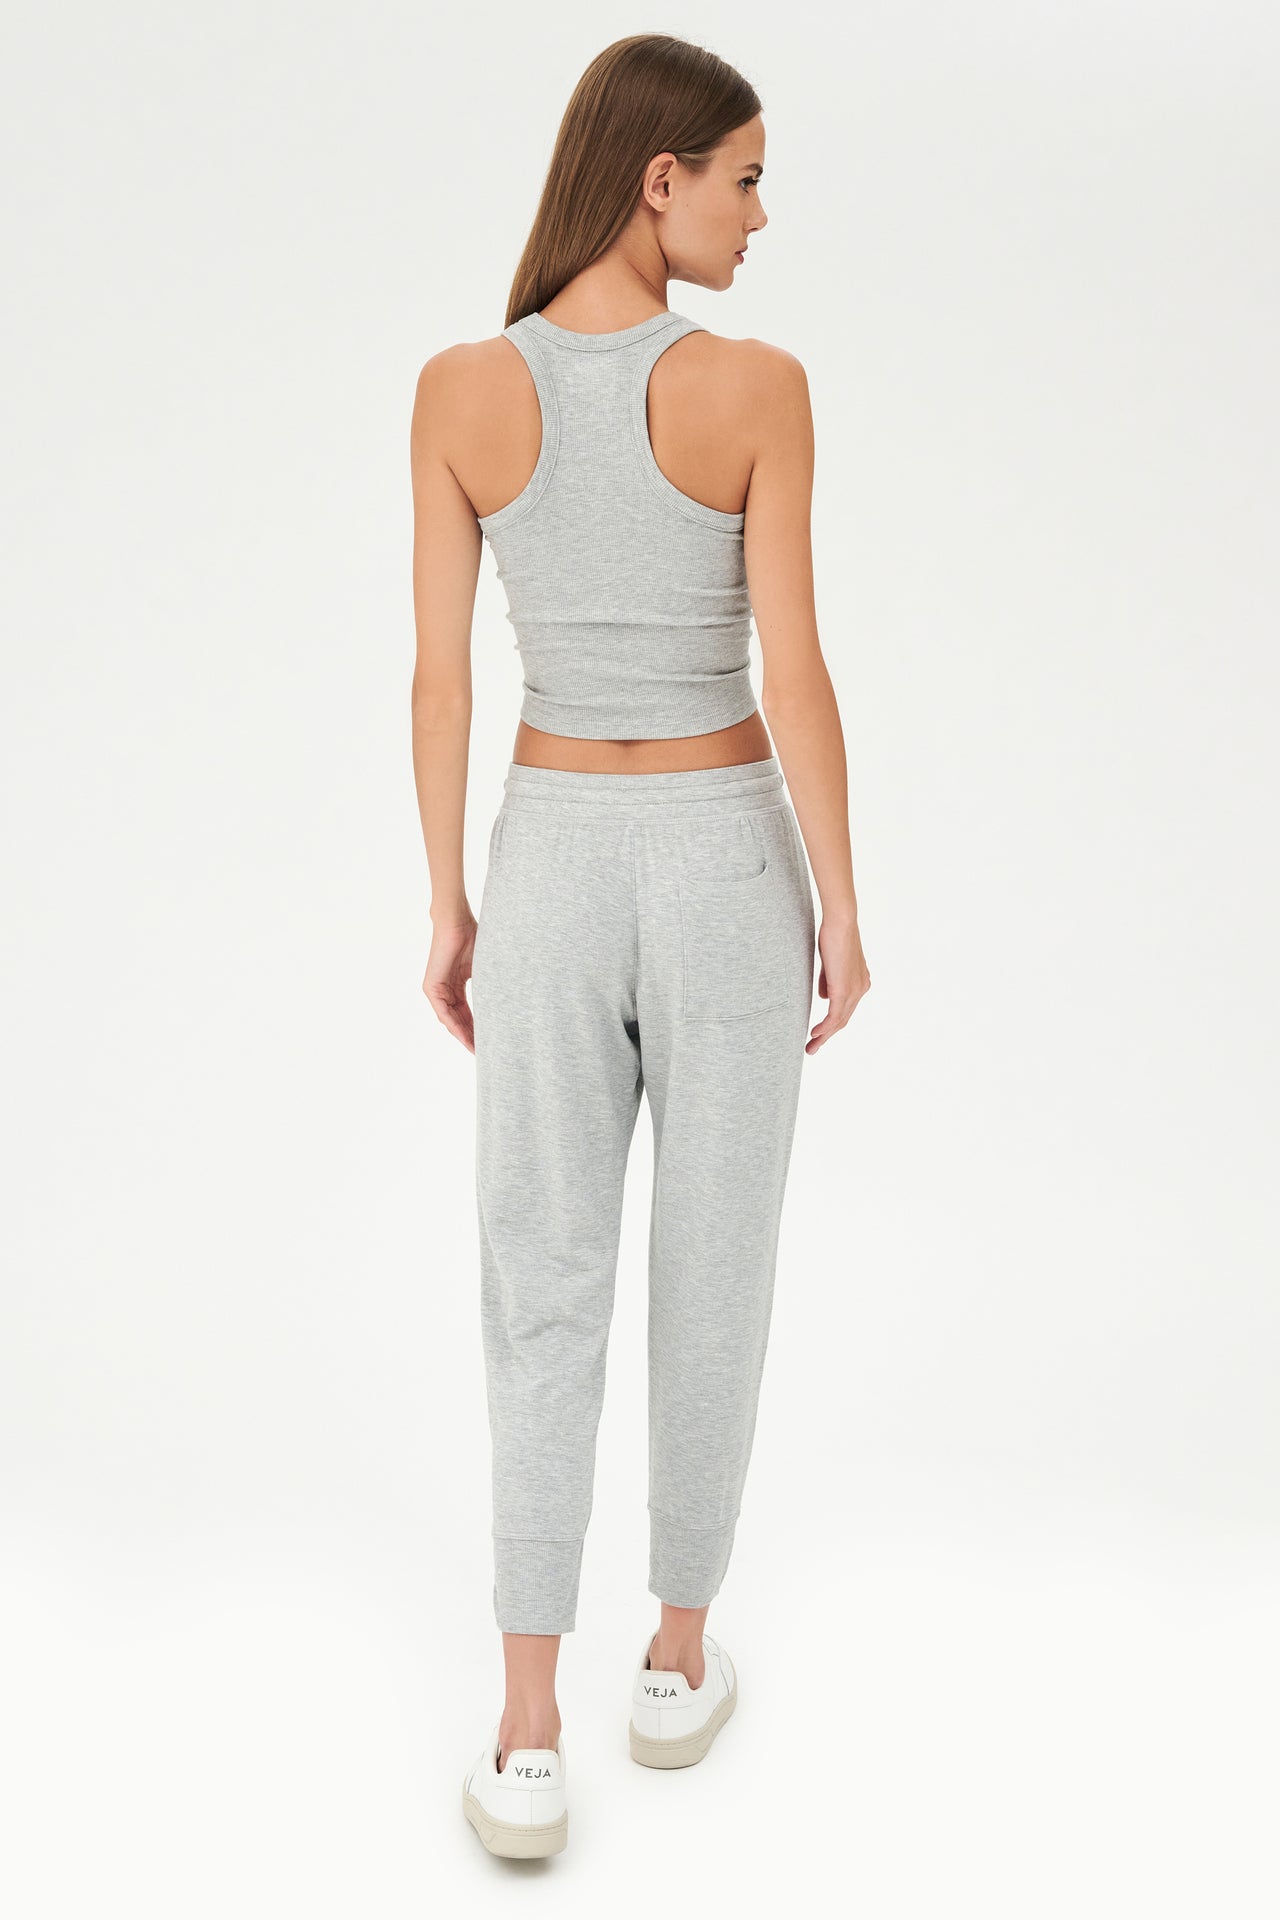 Full back view of girl wearing a ribbed grey cropped tank top and grey sweatpants with a white tie along the waistband with white shoes